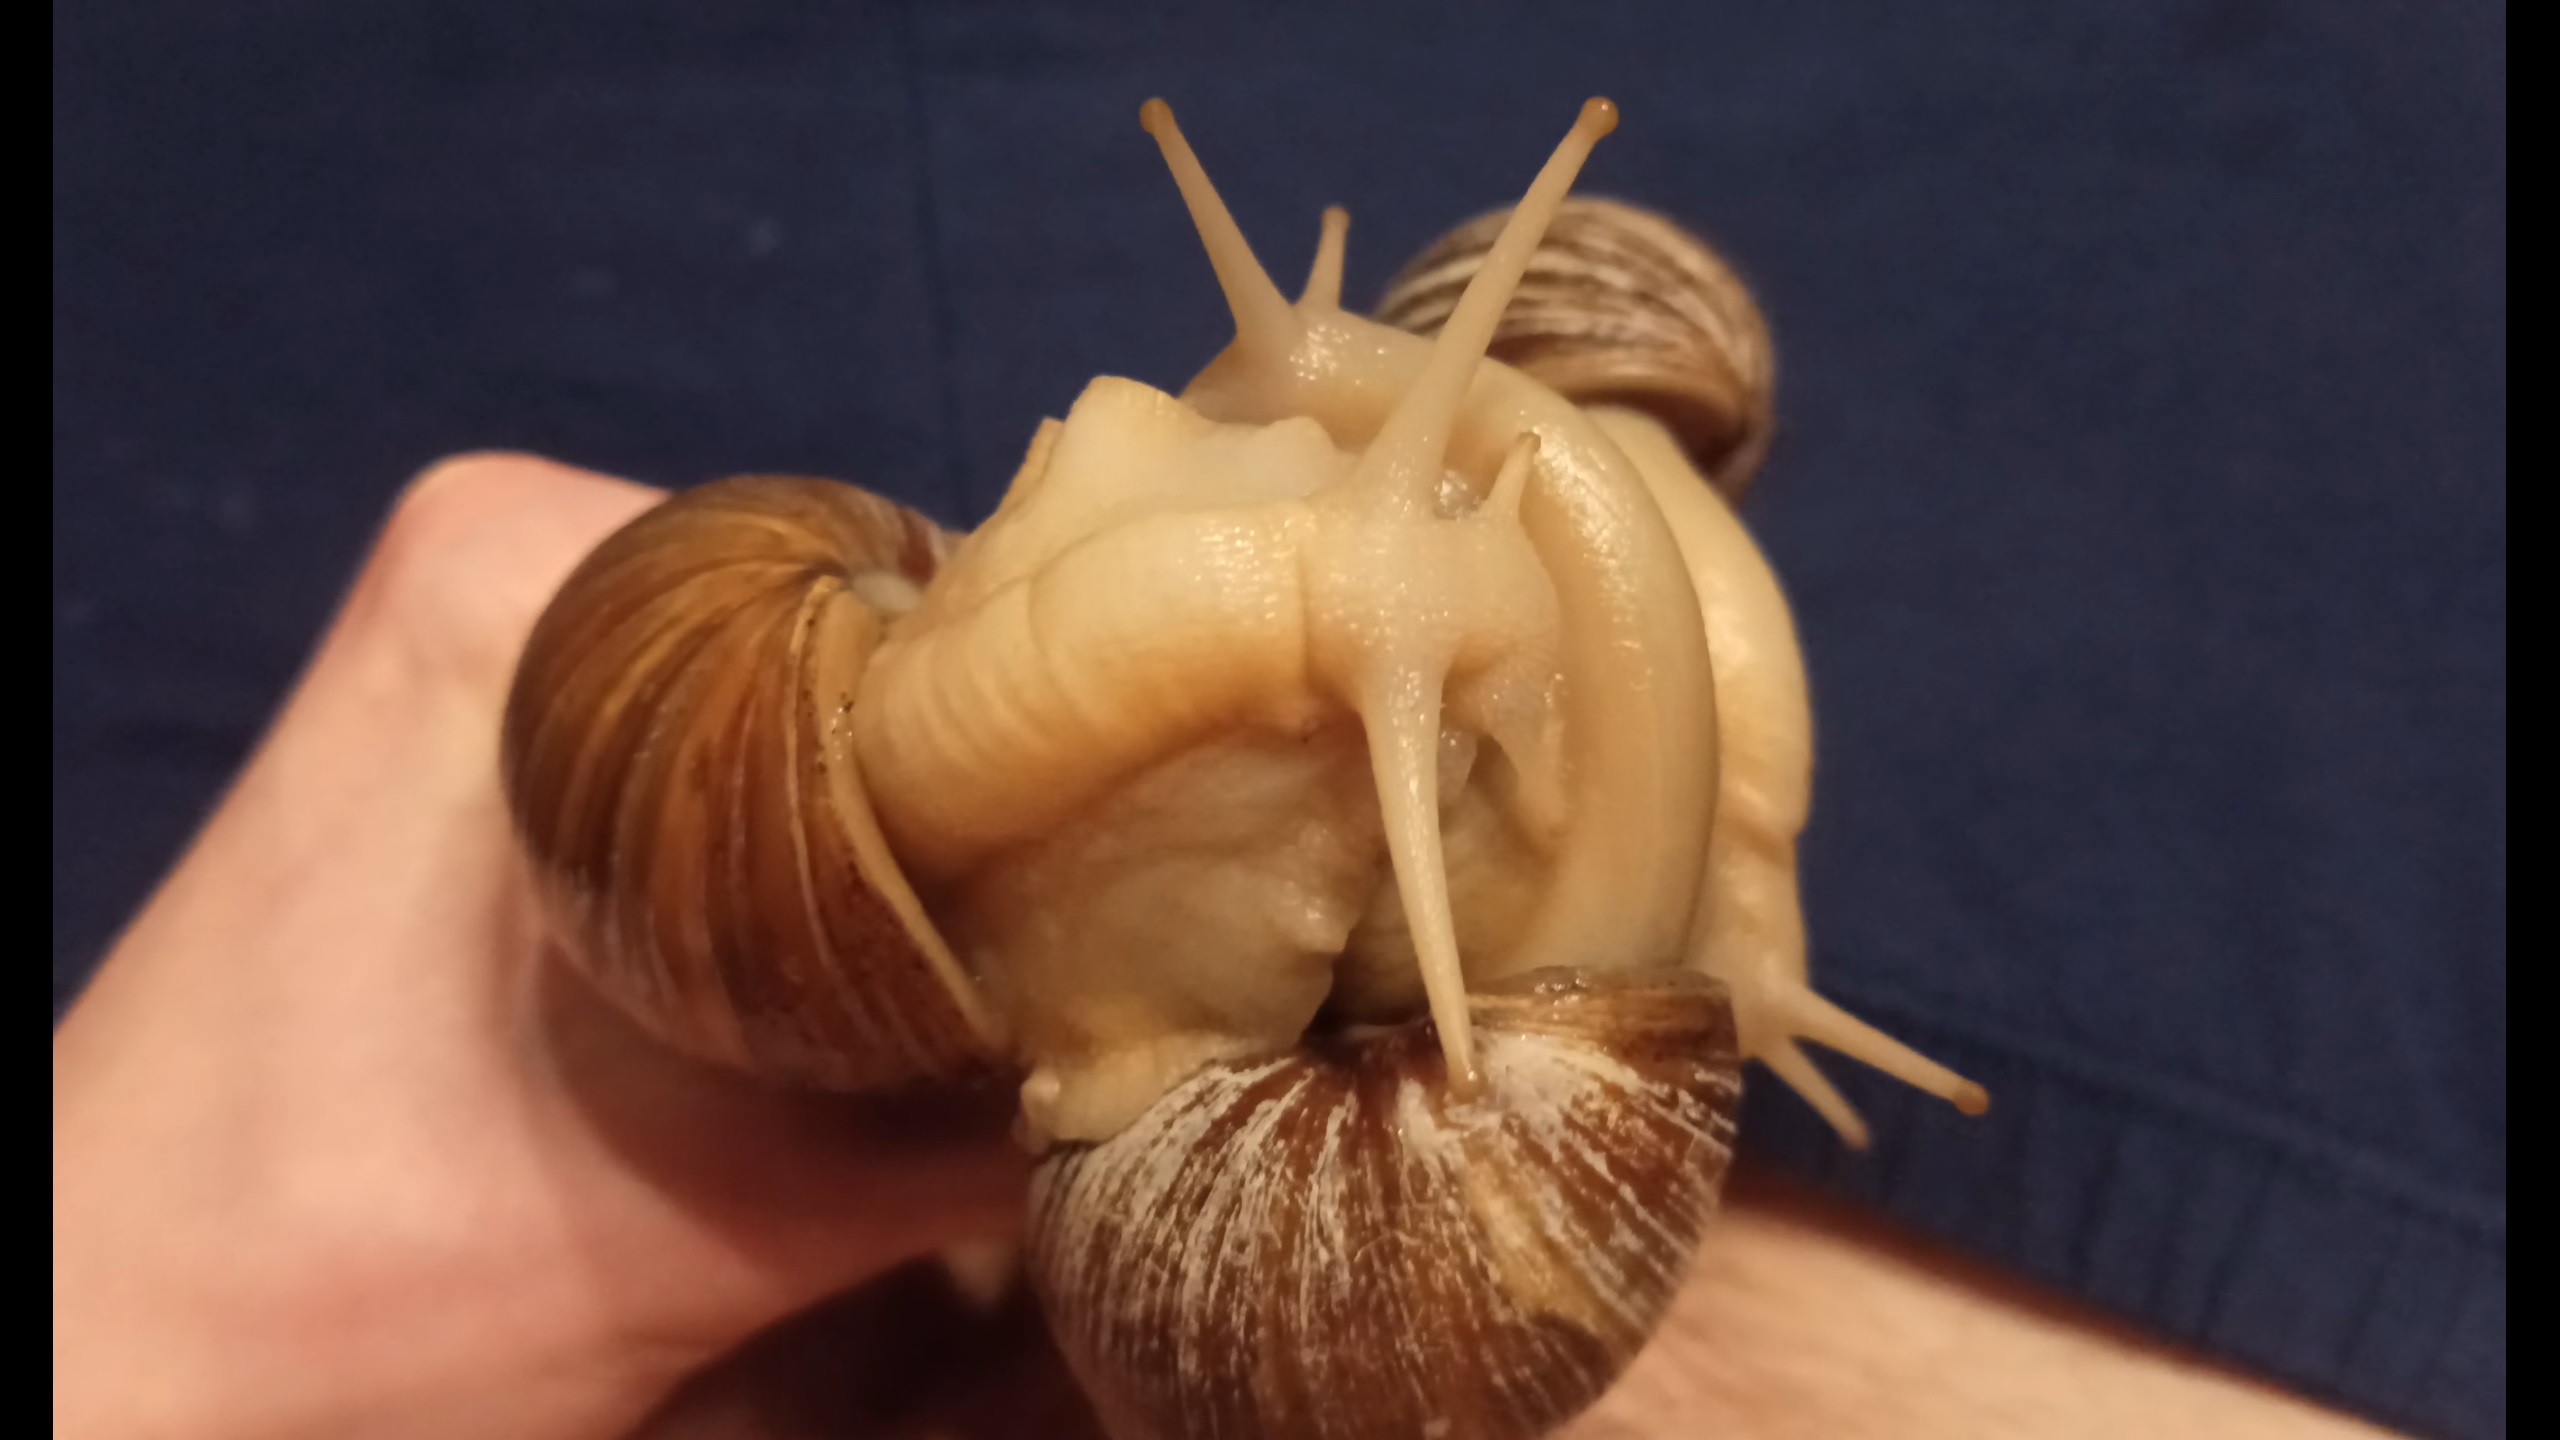 3 Giant Snails stimulate my glans and make me cum